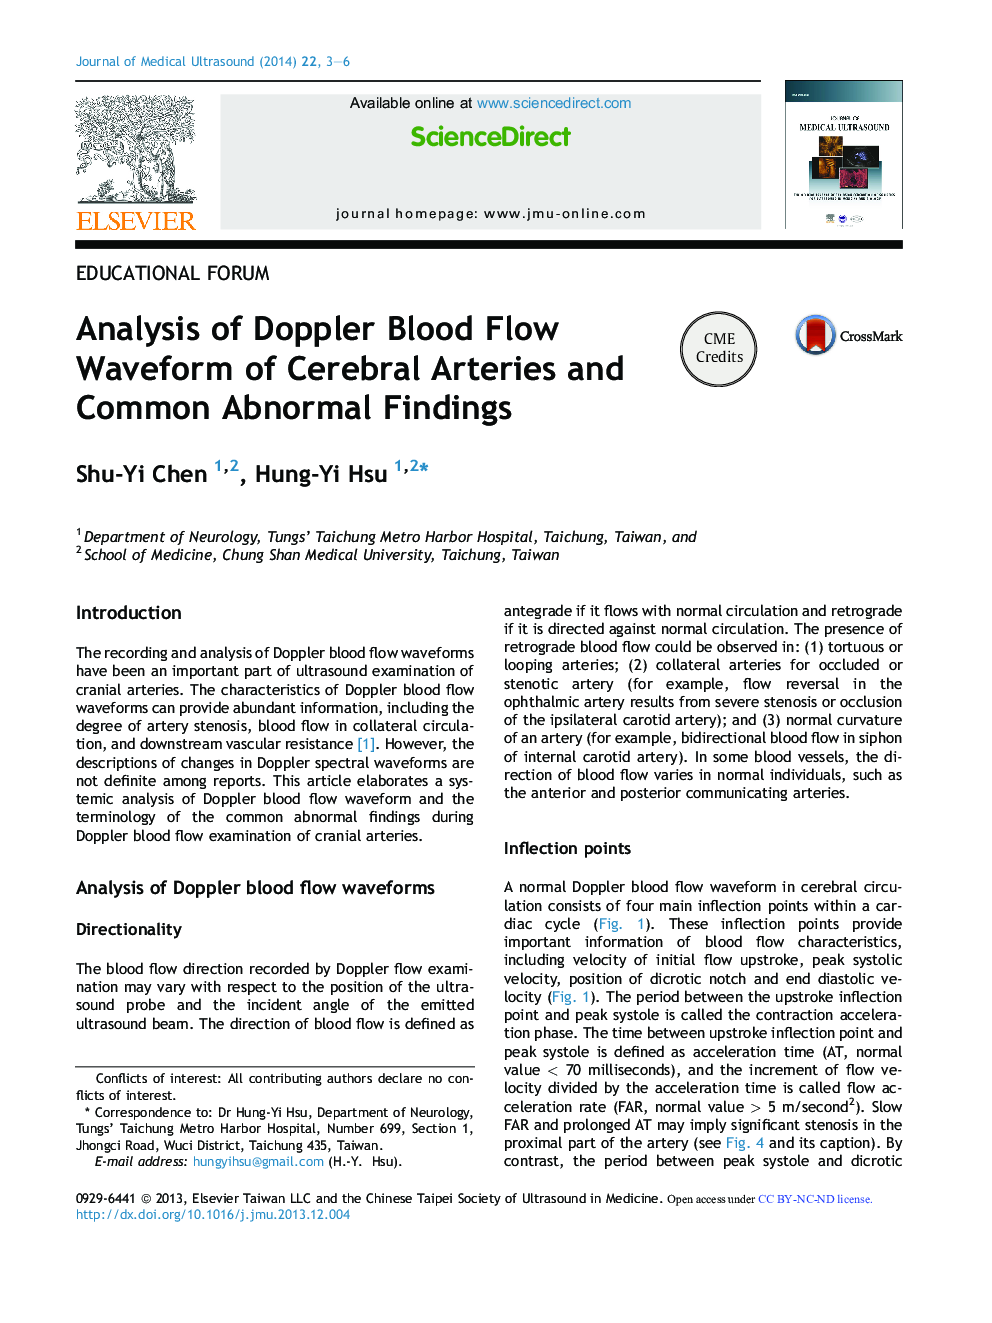 Analysis of Doppler Blood Flow Waveform of Cerebral Arteries and Common Abnormal Findings